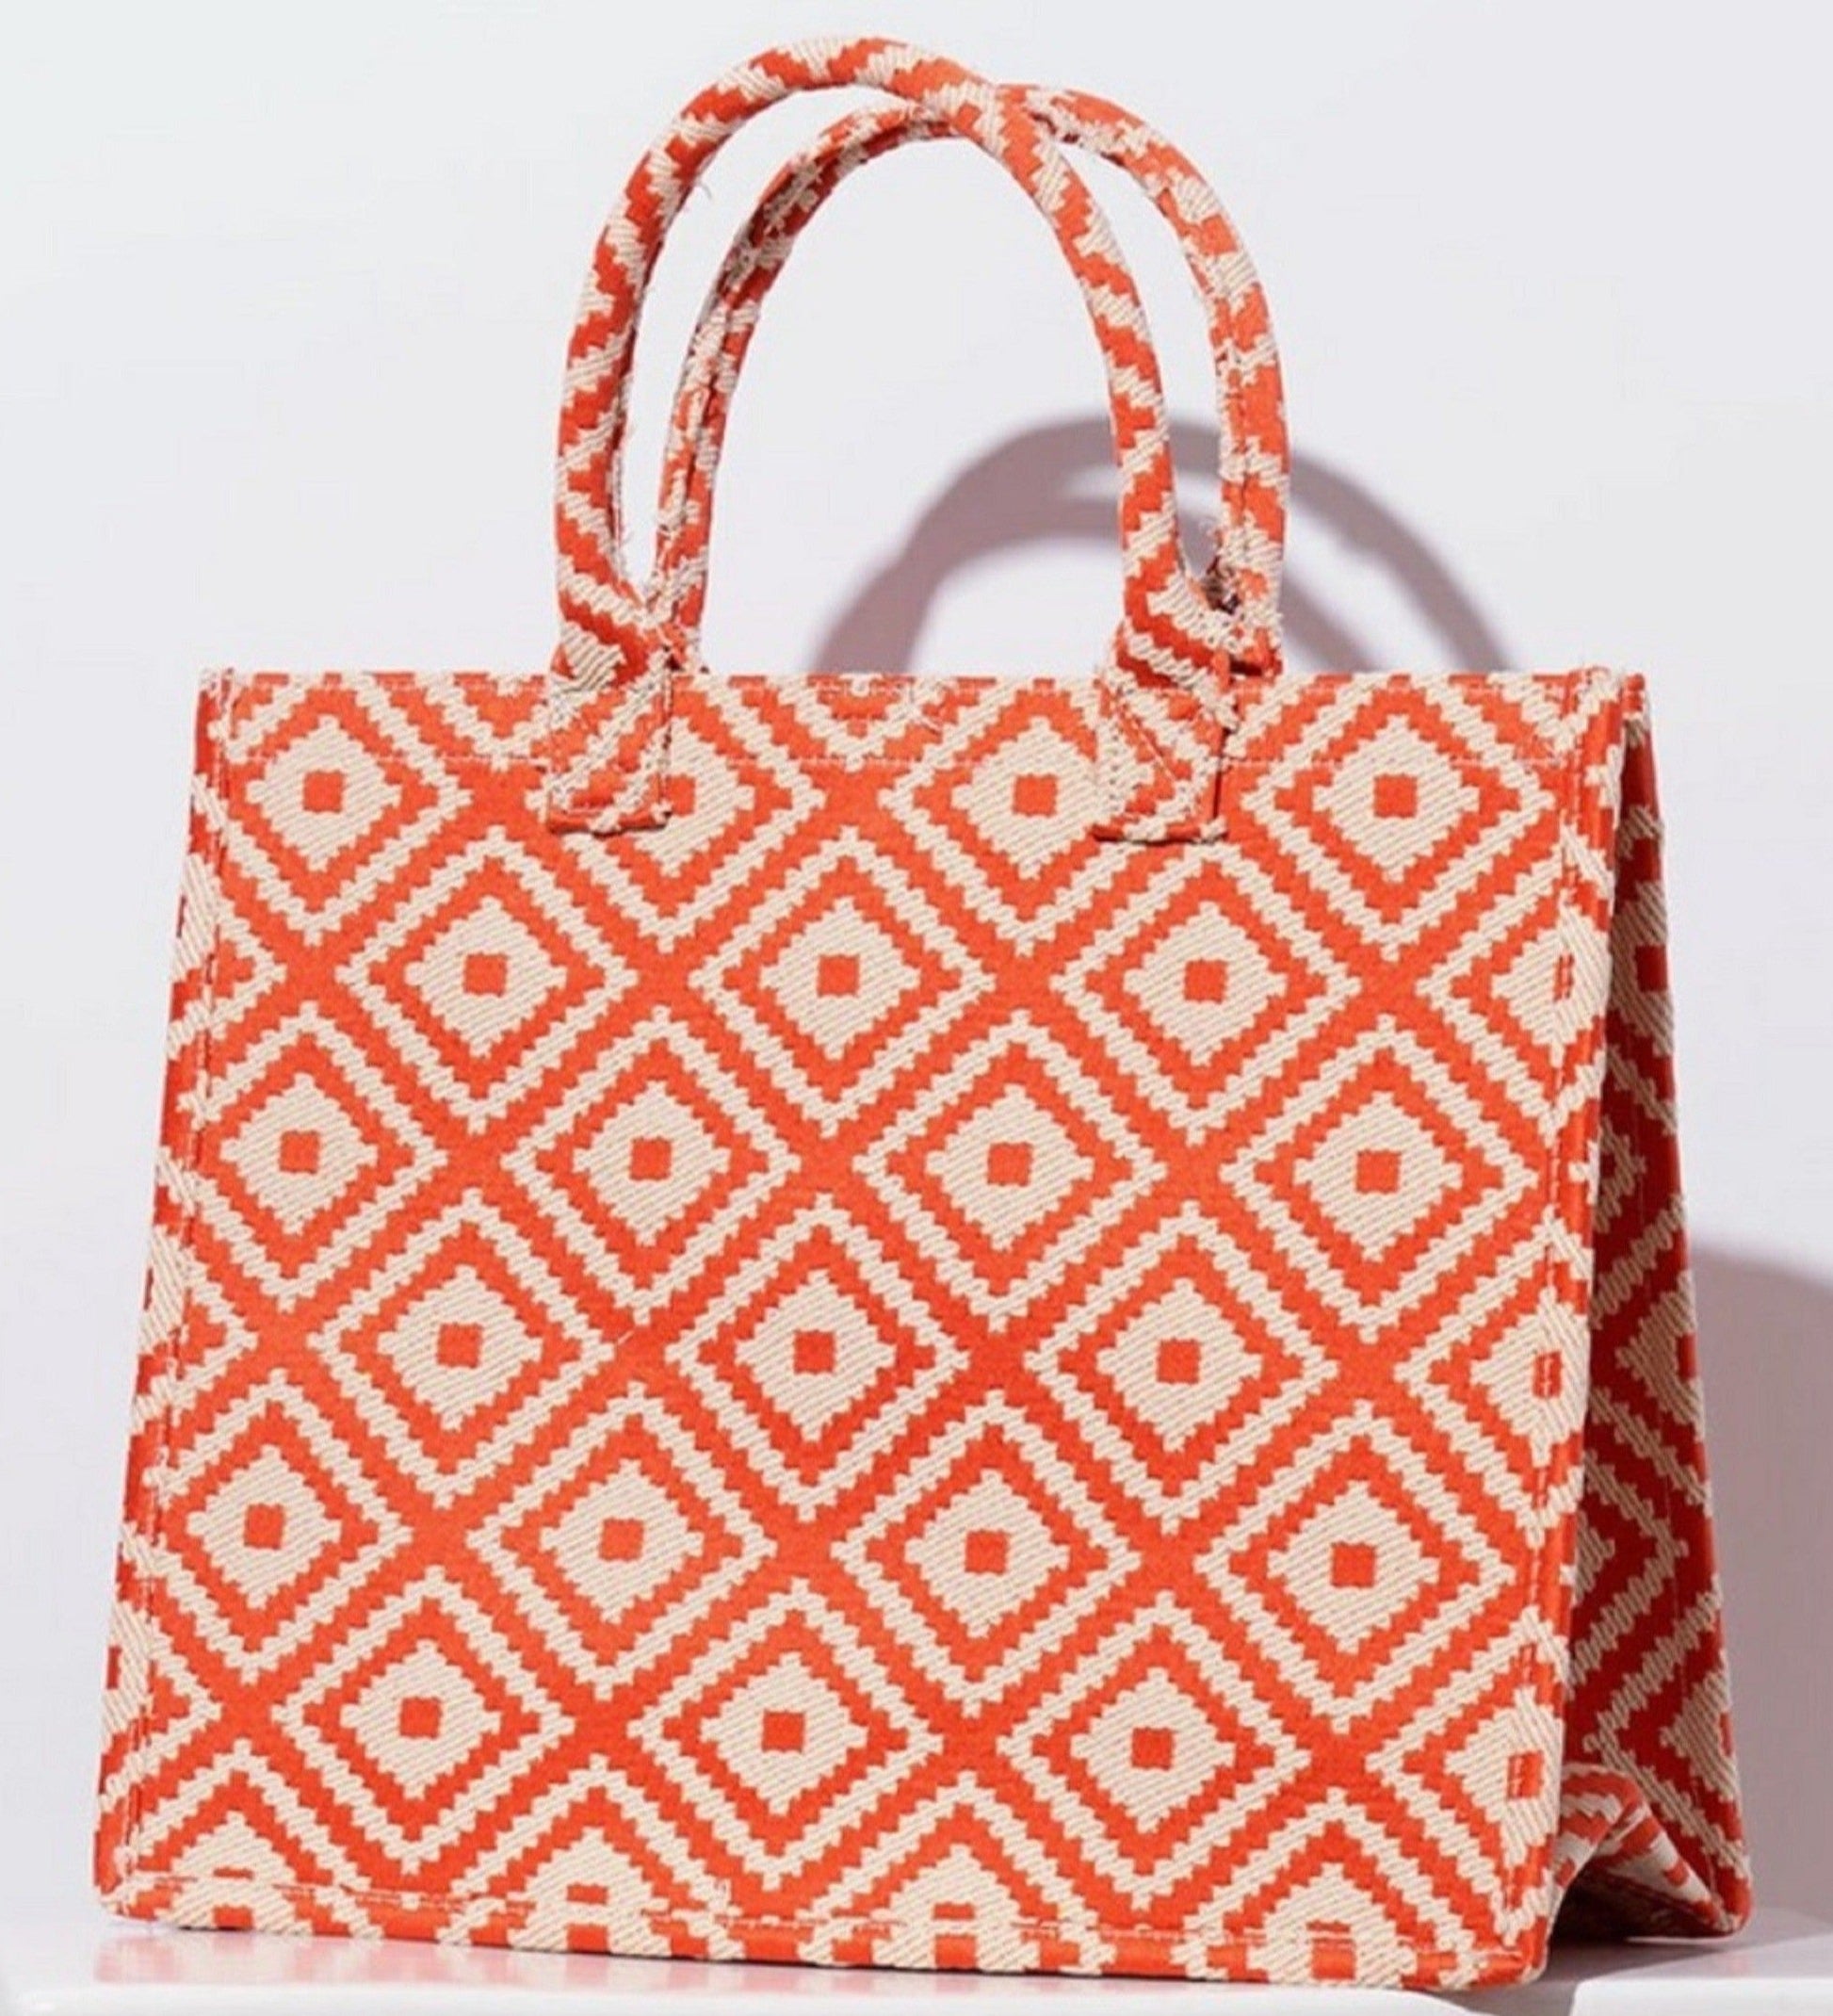 tote bag for women coral cute handbag perfect for summer or cold season